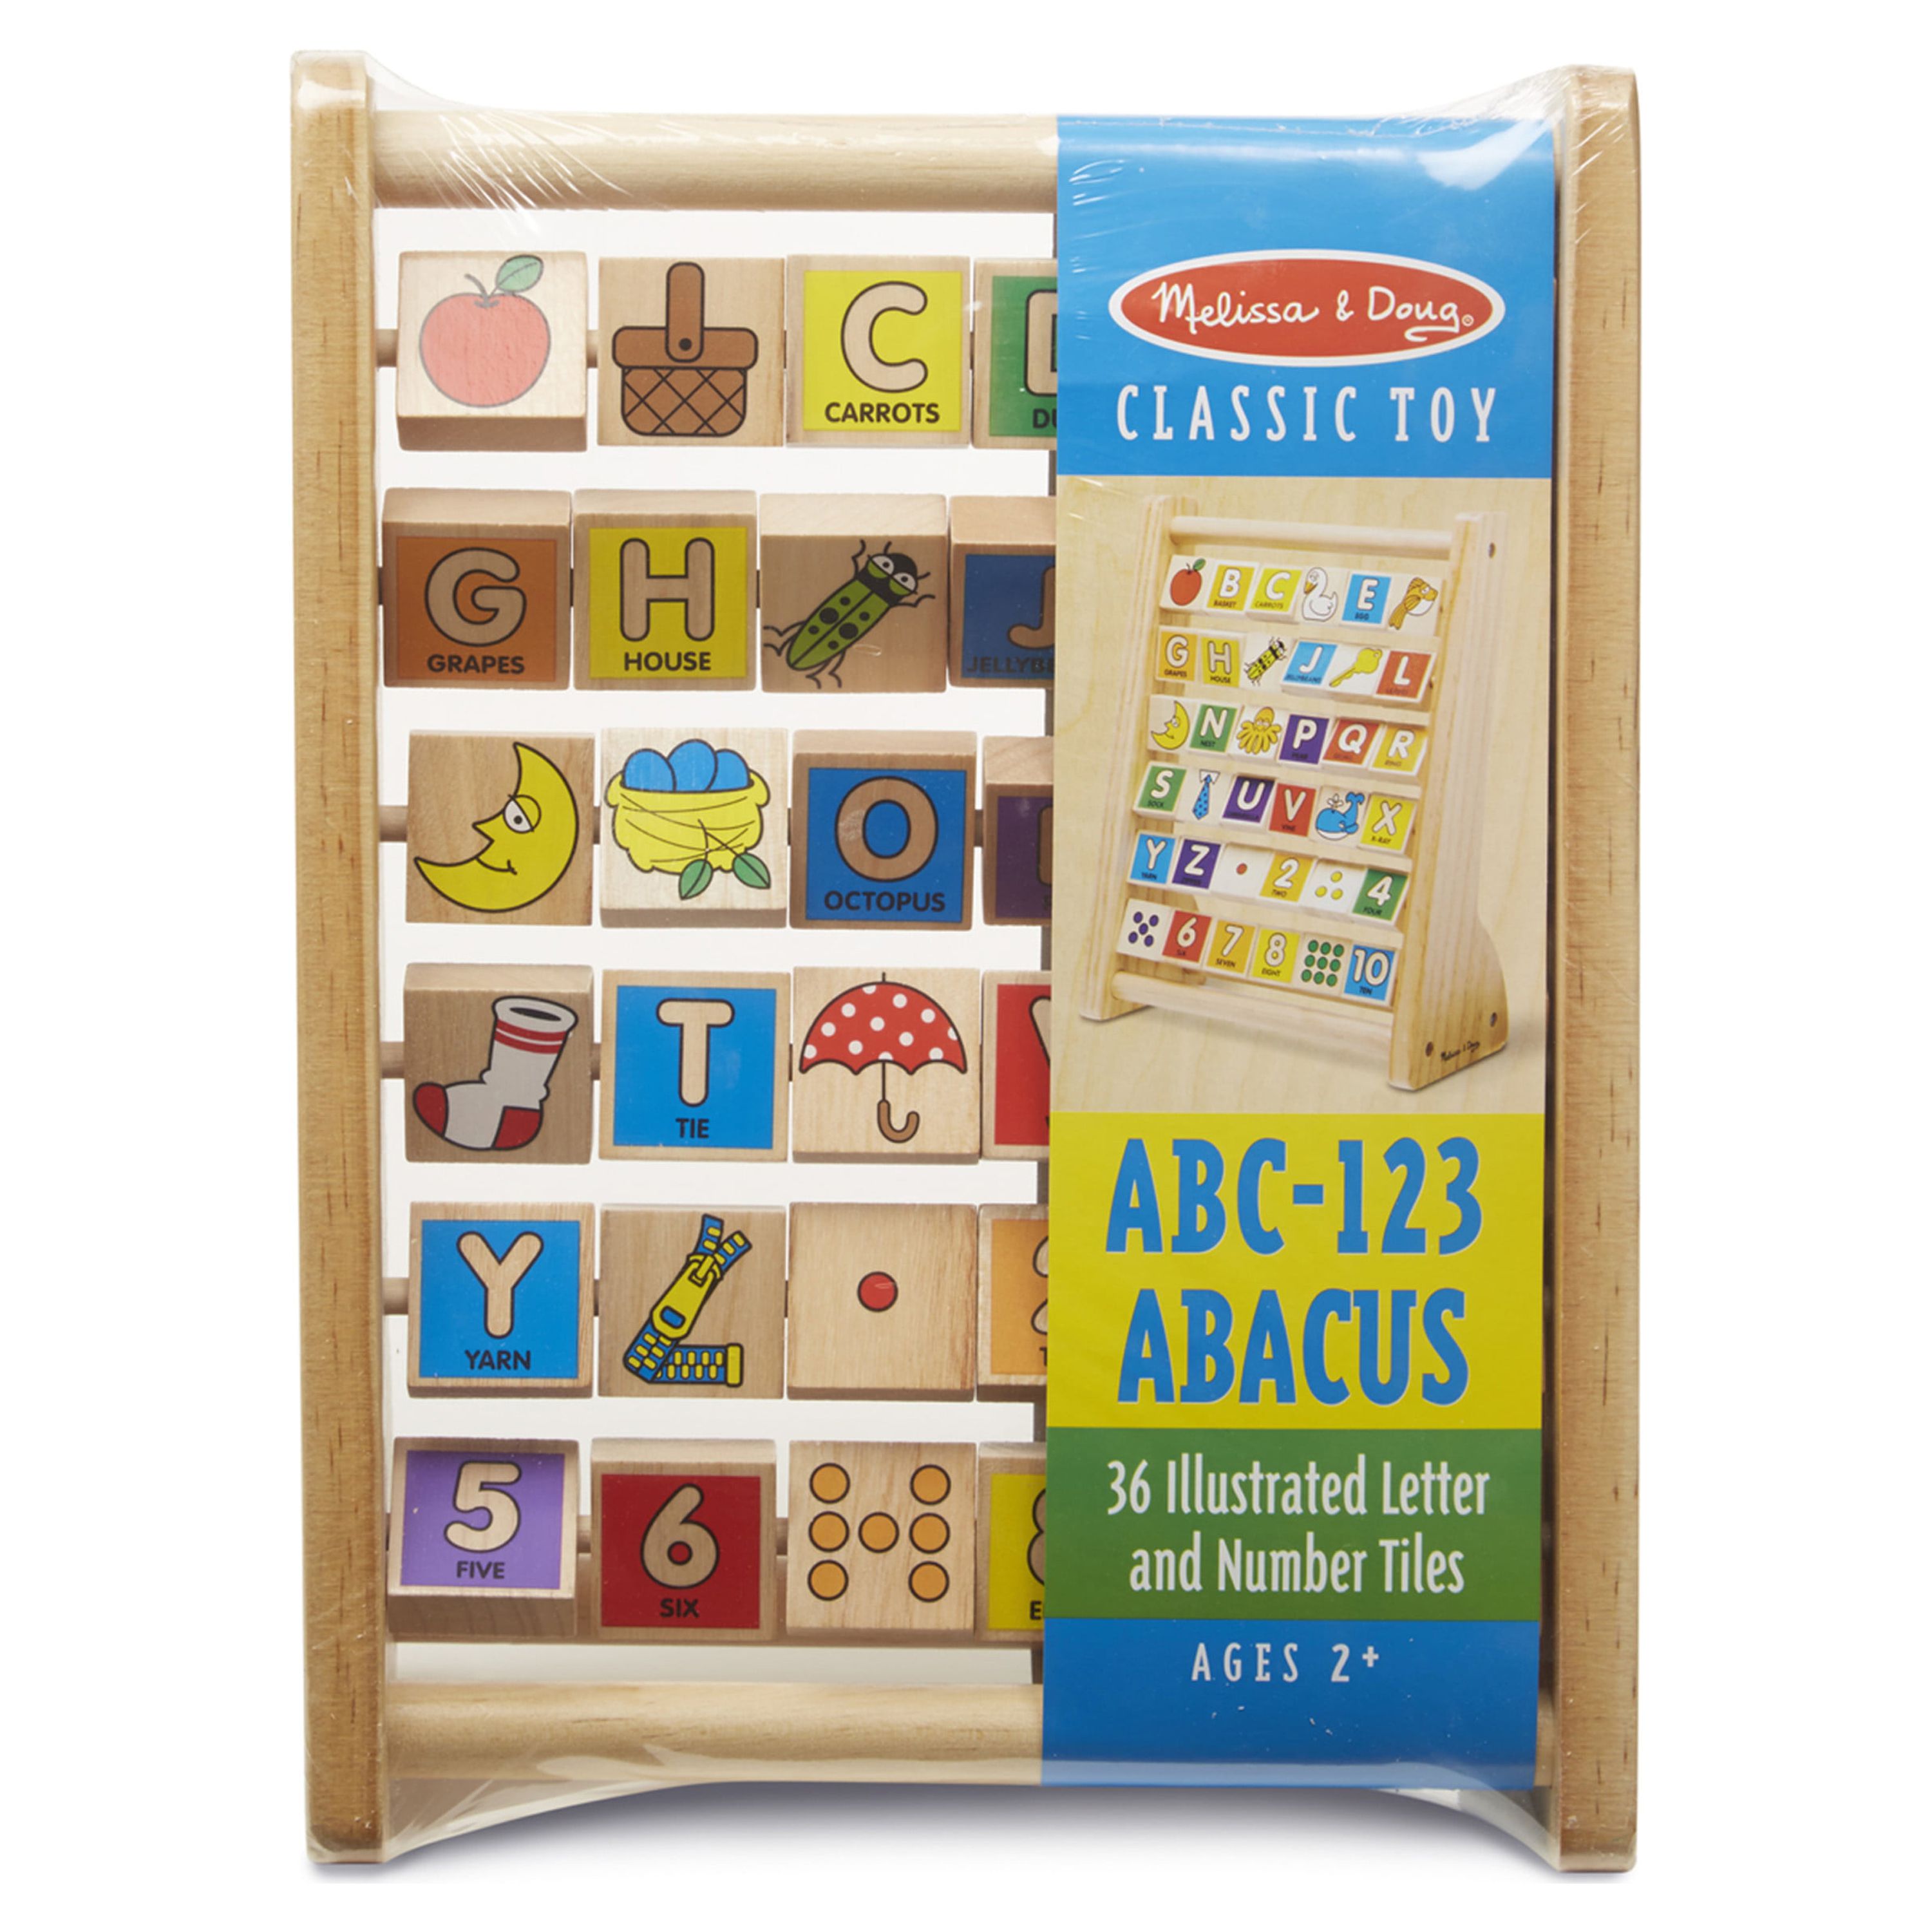 Melissa & Doug ABC-123 Abacus - Classic Wooden Educational Toy With 36 Letter and Number Tiles - image 3 of 9